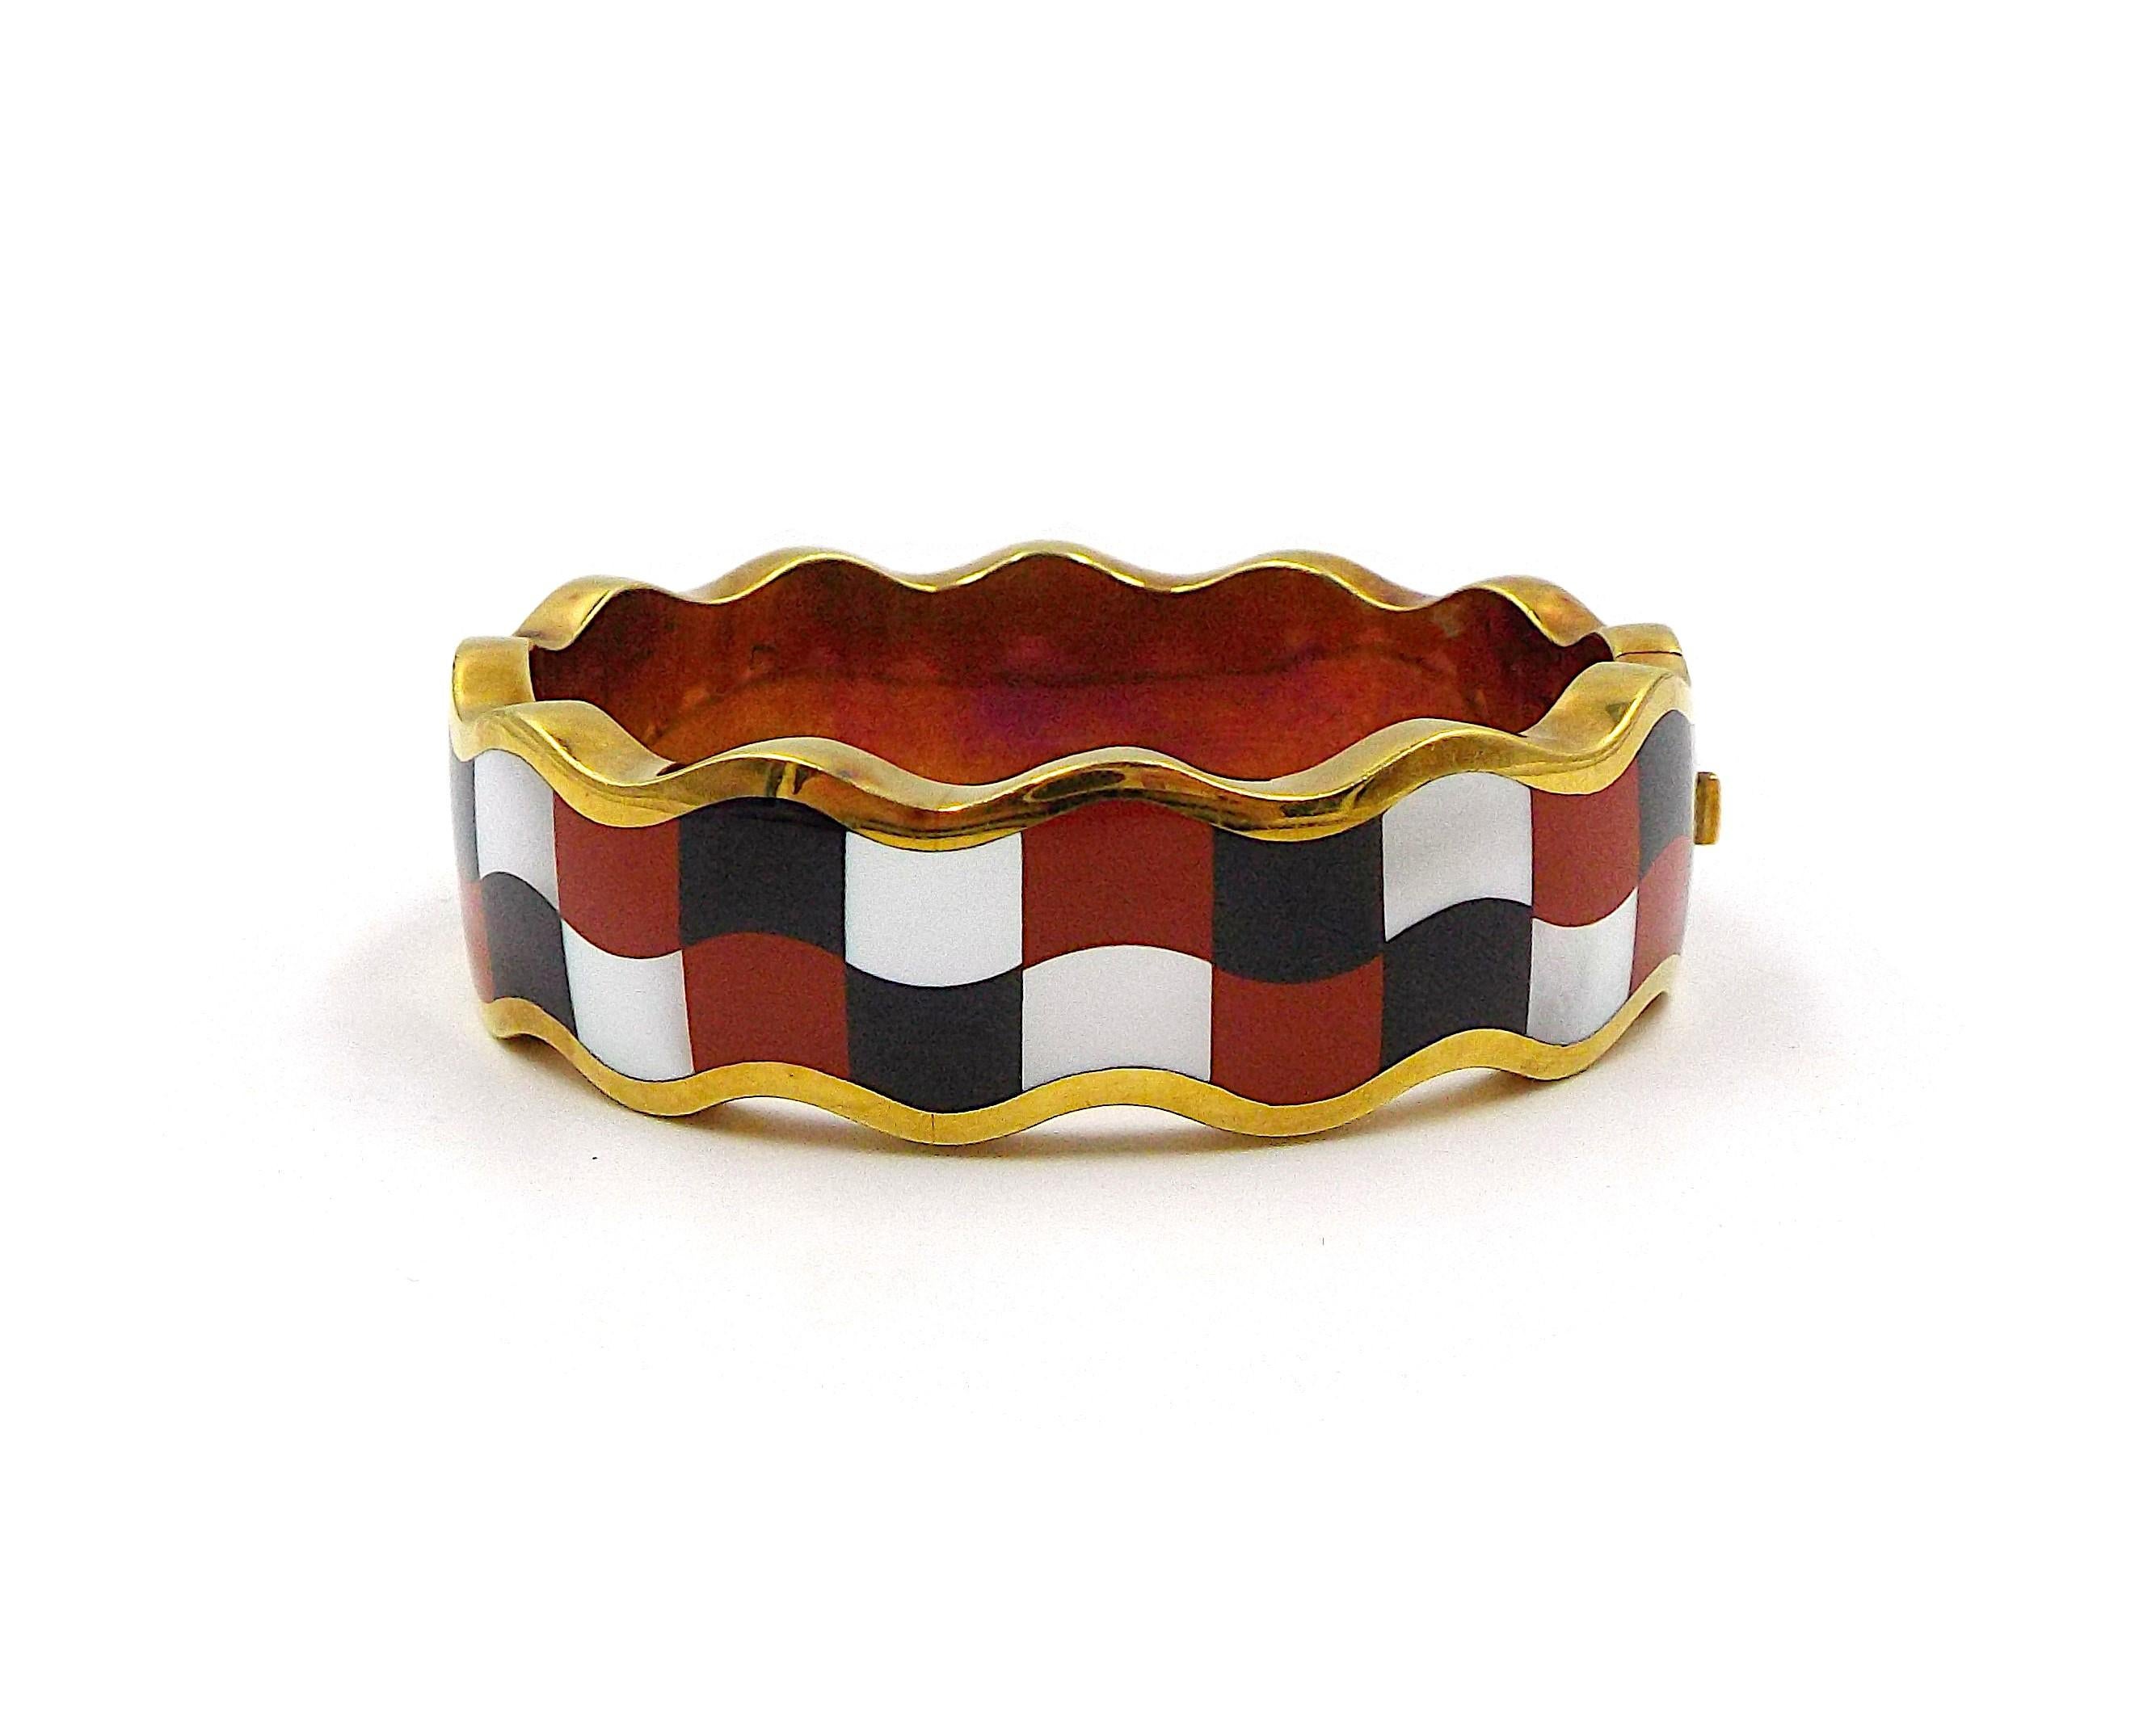 A stylish bangle bracelet by Angela Cummings for Tiffany featuring chess board pattern made of jasper, onyx and mother-of-pearl square-shaped stones. Signed Tiffany, with maker's marks, marked 750, 18K. Inner circumference is approximately 6.5